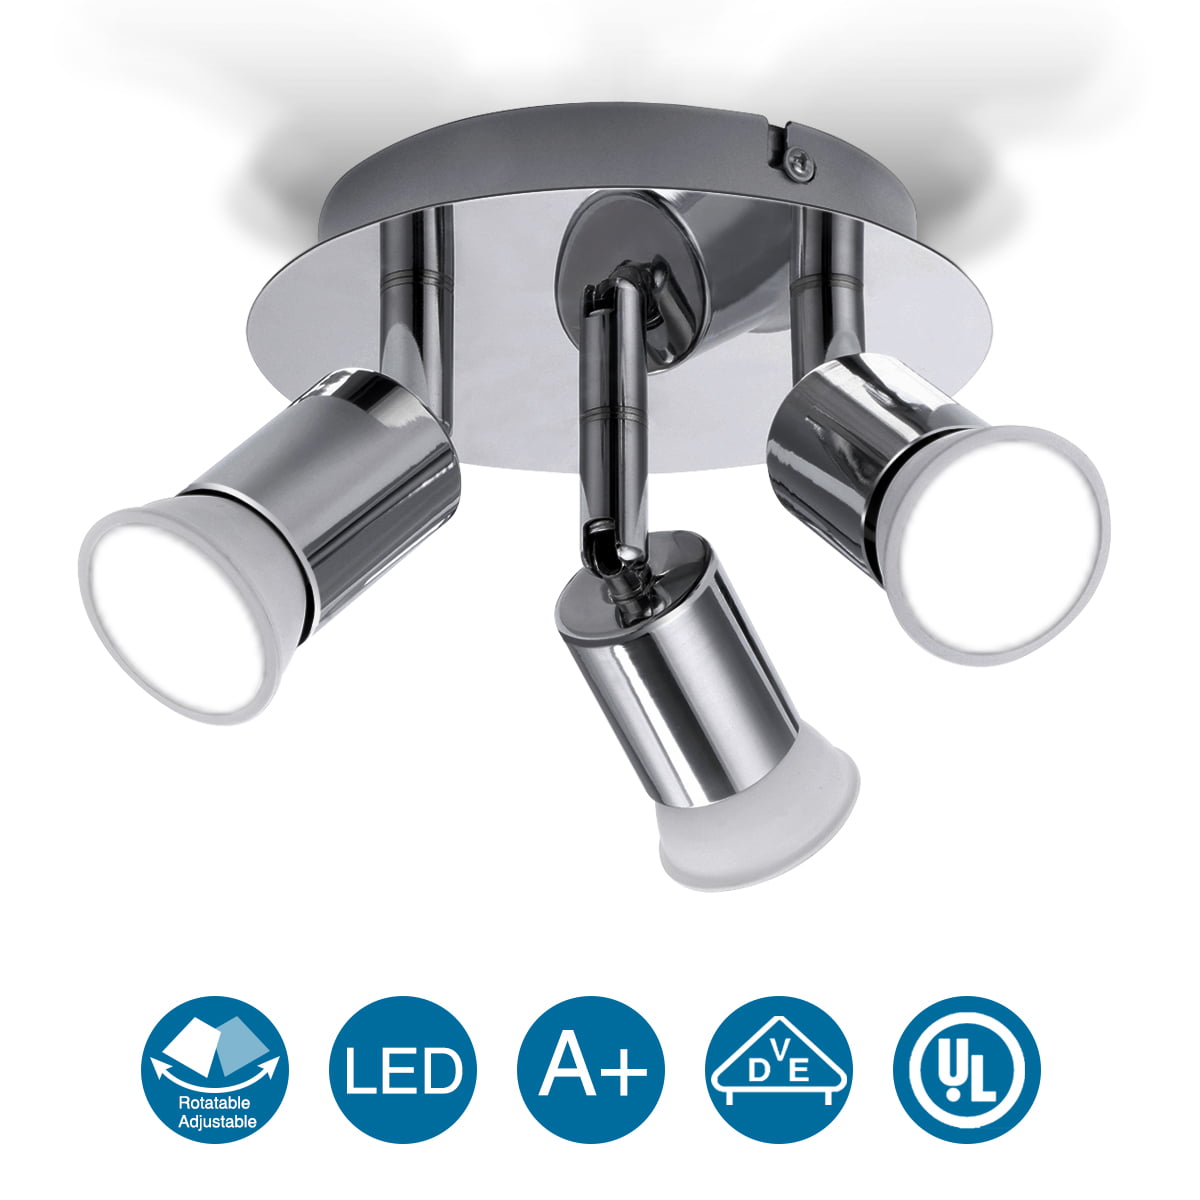 4 Bar Ceiling Spotlight in Satin Silver with 4 2W Led Bulbs by Laeto Lighting Ideal for Kitchen Bedroom Lounge Office